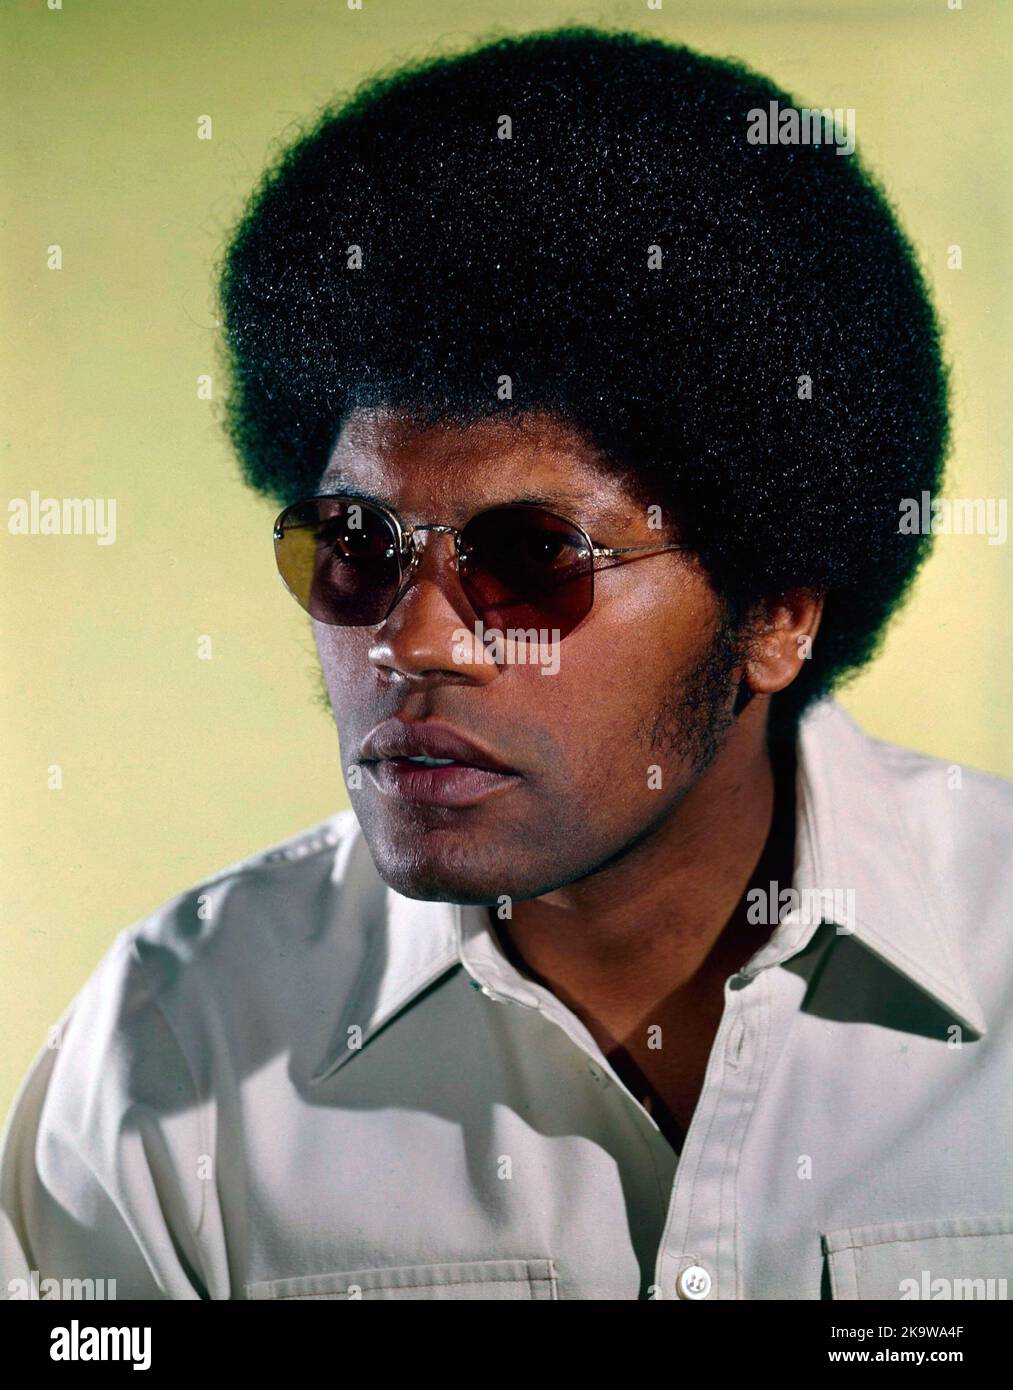 CLARENCE WILLIAMS III in THE MOD SQUAD (1968), directed by JERRY JAMESON, GENE NELSON, EARL BELLAMY, GEORGE MCCOWAN and BUDDY RUSKIN. Credit: Thomas-Spelling Productions / Album Stock Photo